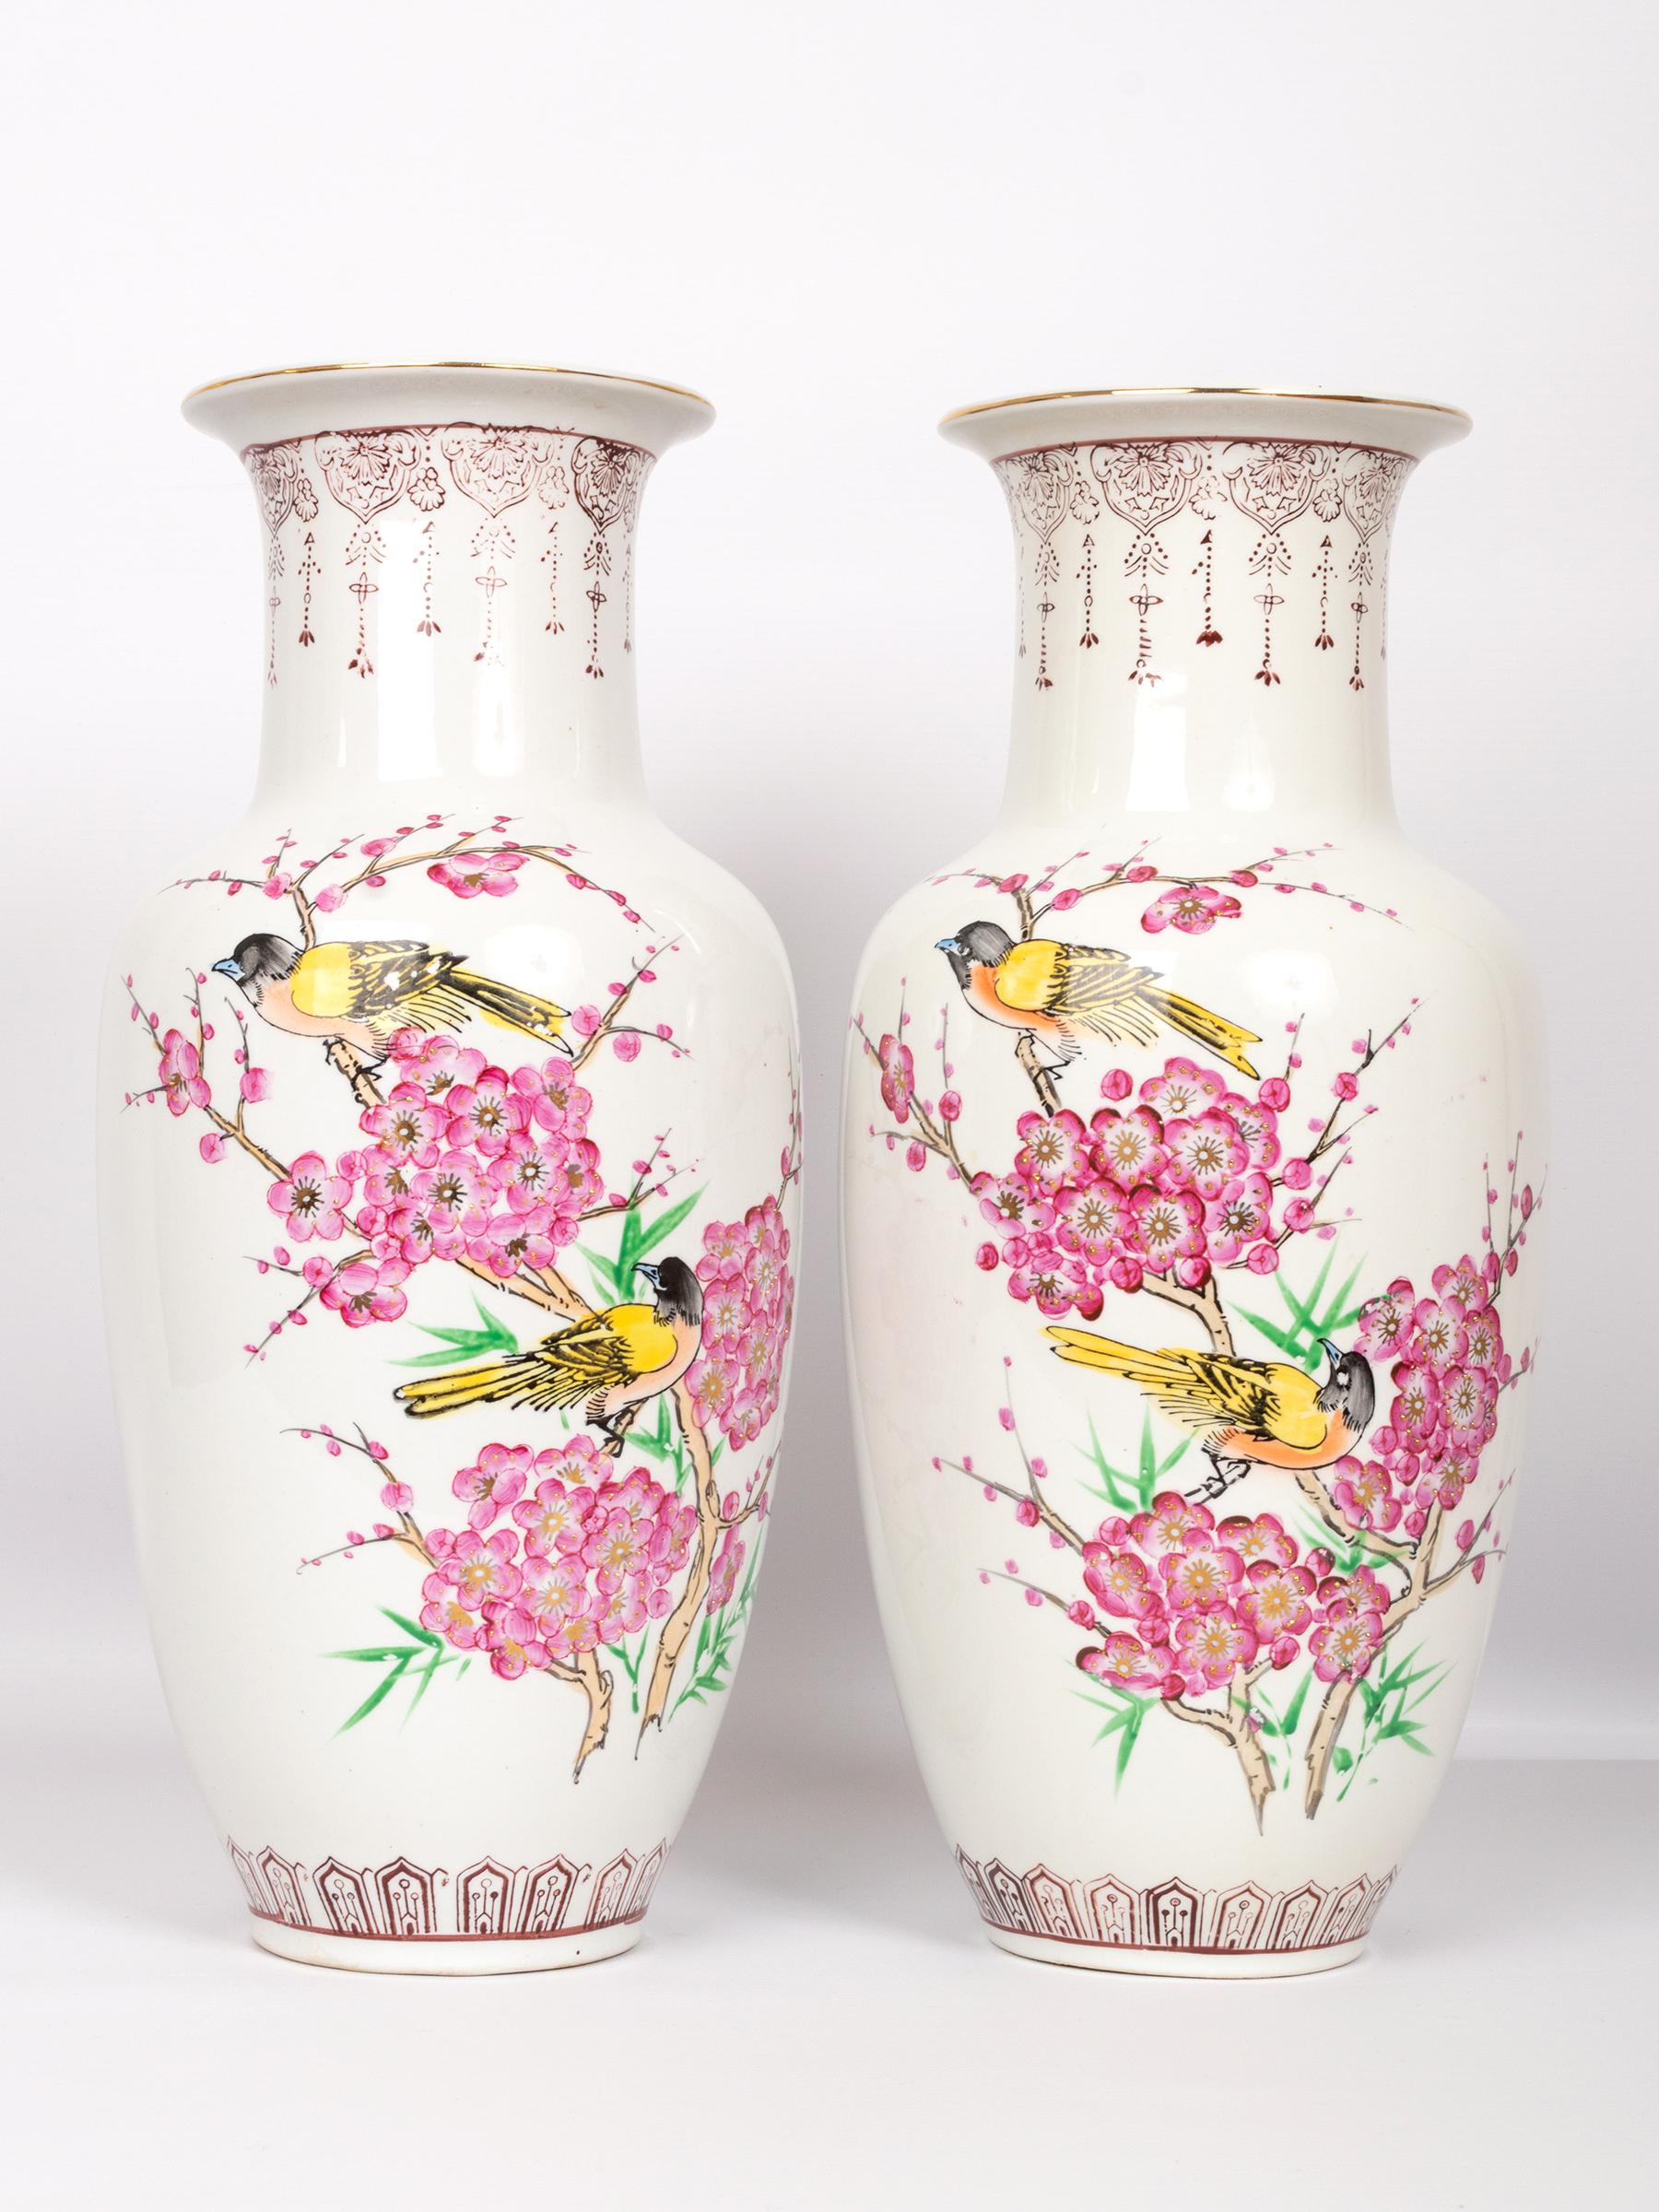 Pair of Tall Chinese Famille Rose 'Birds And Blossom' Baluster Porcelain Vases,
With a Seal Mark to base
Mid 20th Century
In very good condition, no cracks or chips.